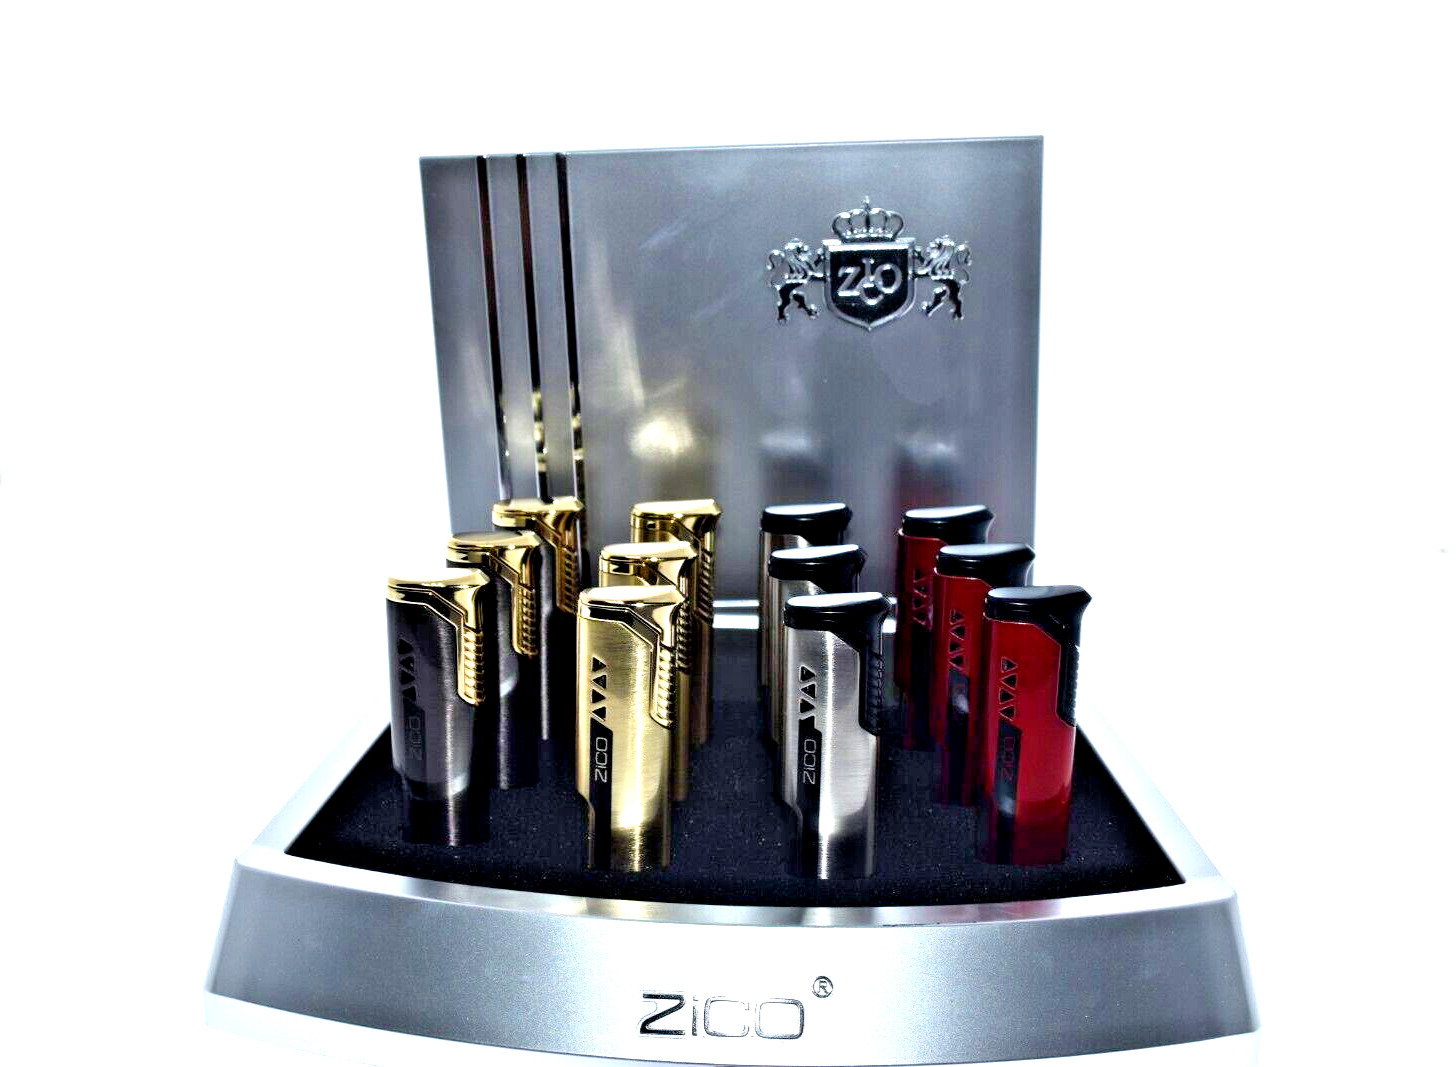 ZICO ZD 84 SINGLE FLAME POCKET LIGHTER - WITH DISPLAY OF 12 TORCHES